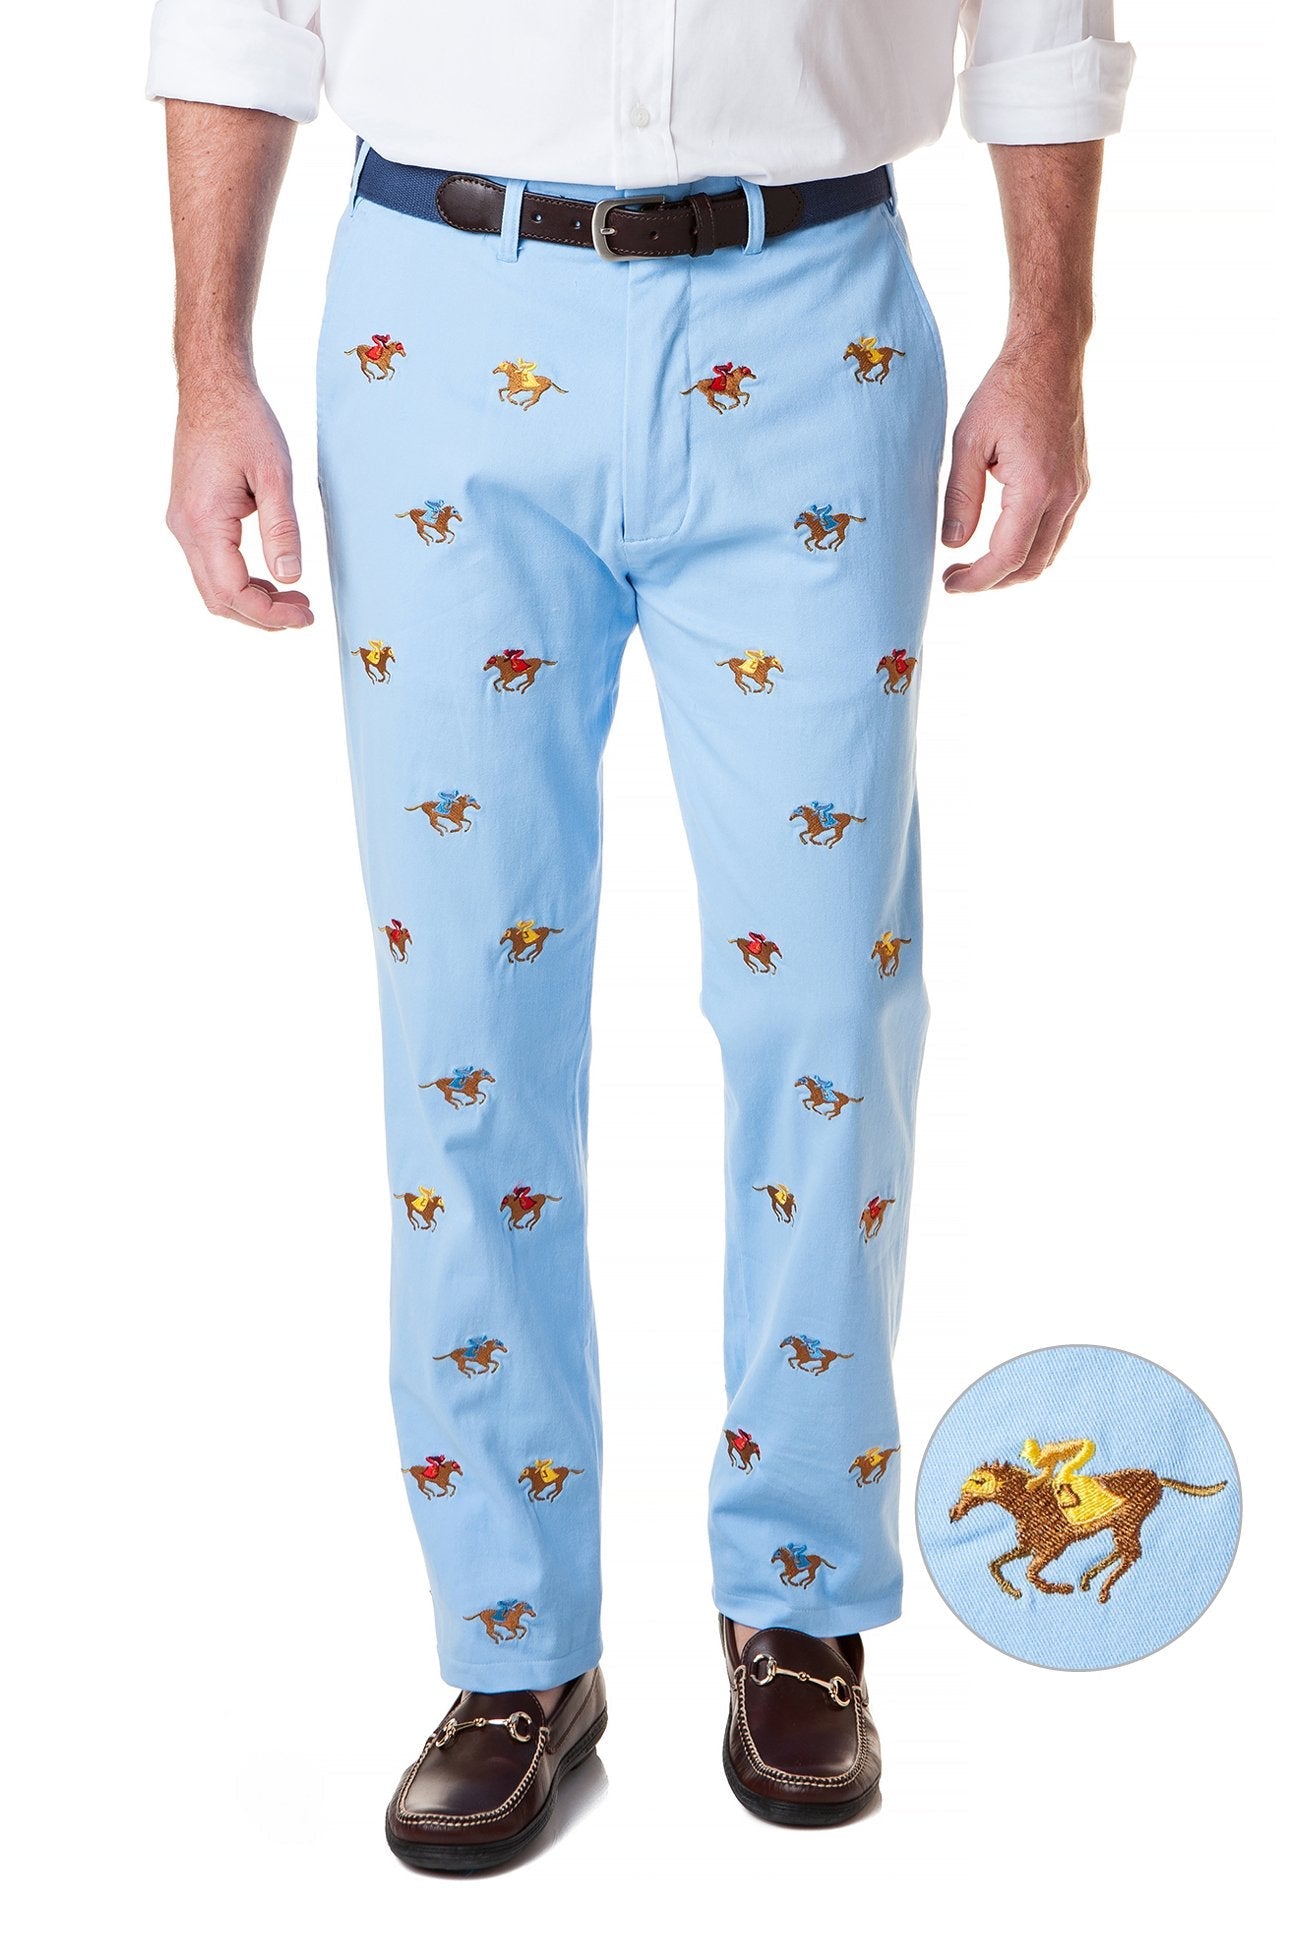 Castaway Mens Embroidered Twill Pants with Racing Horses - Derby